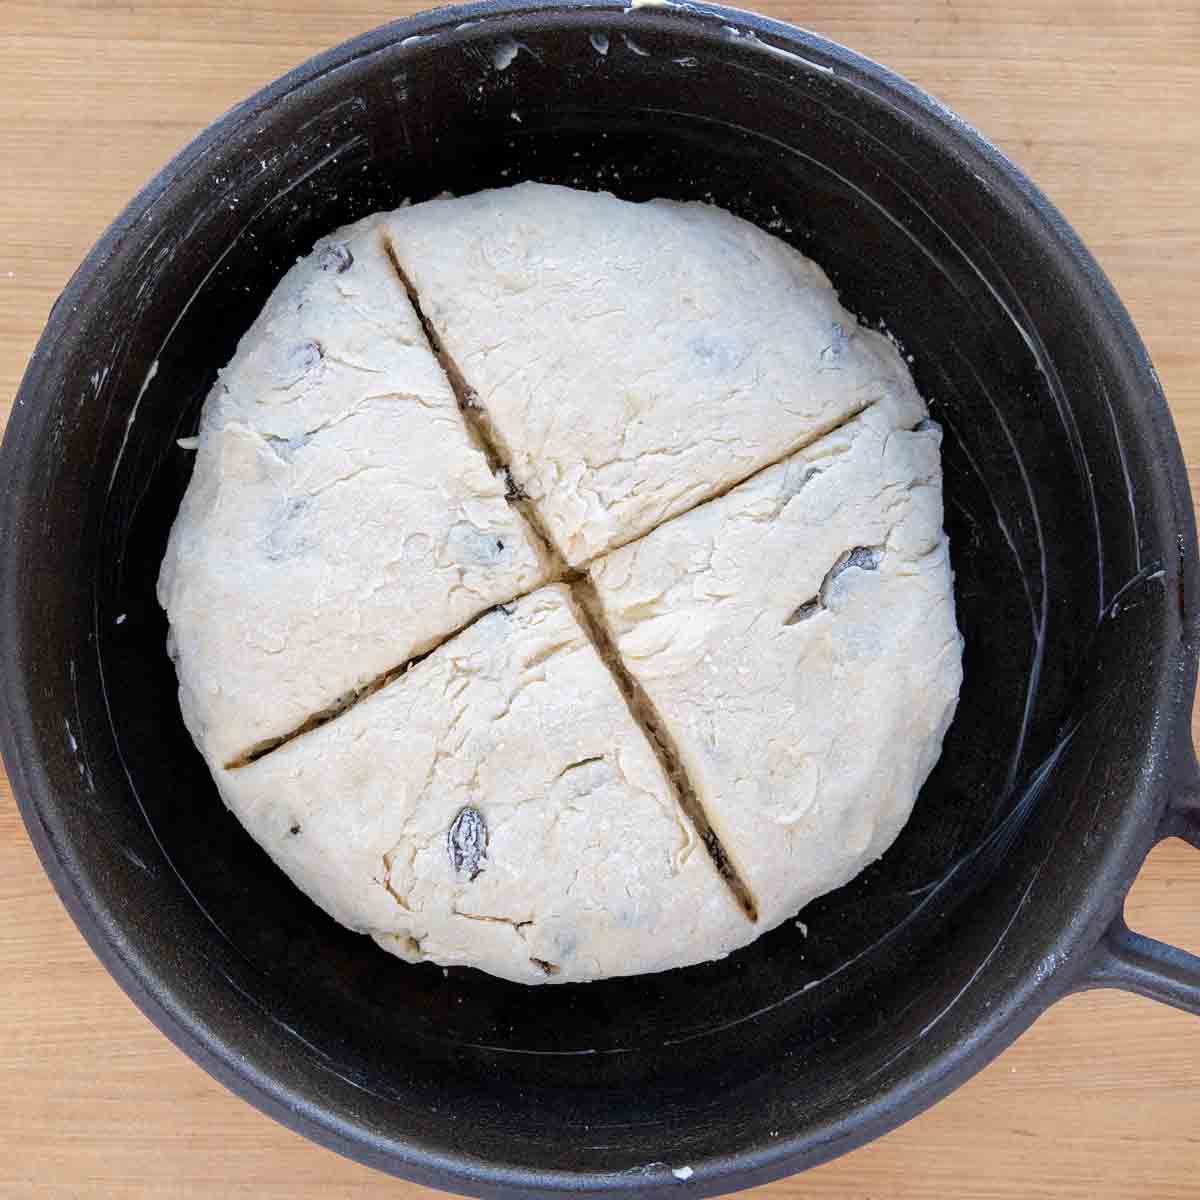 soda bread with an cross cut into the dough in a buttered cast iron pan